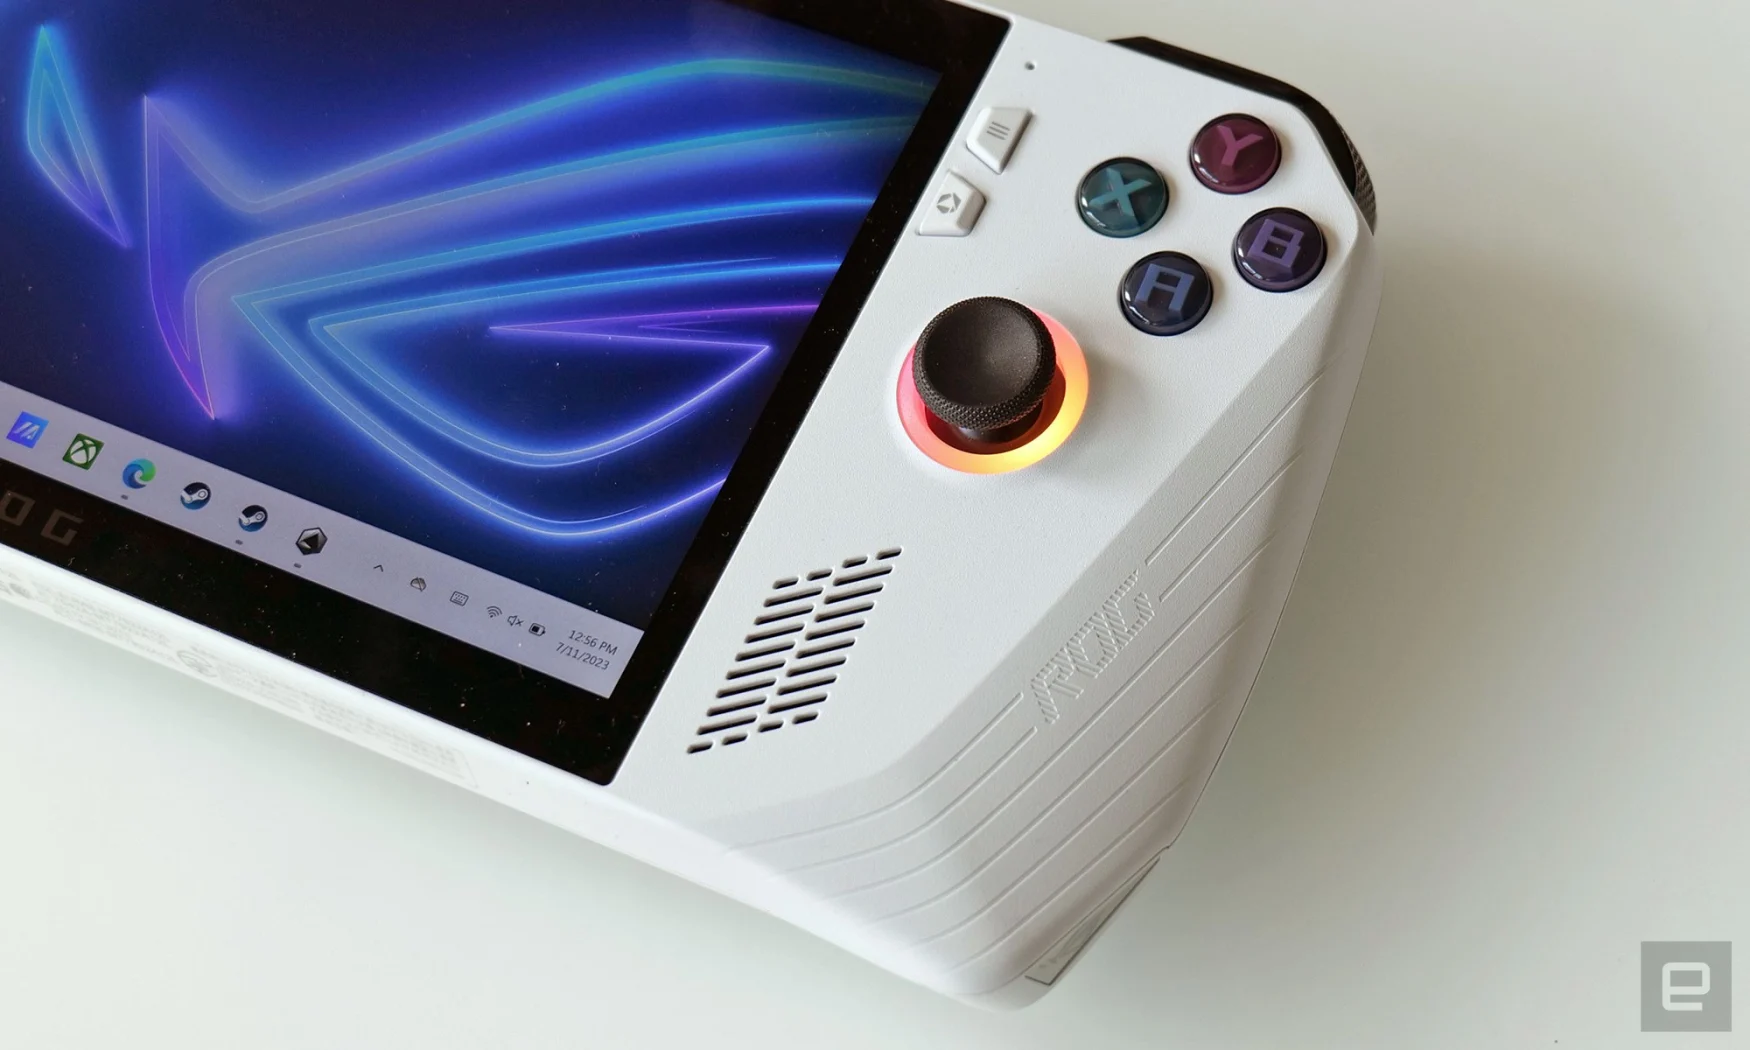 Lenovo Legion Go hands-on: A more Switch-like handheld gaming PC | DeviceDaily.com